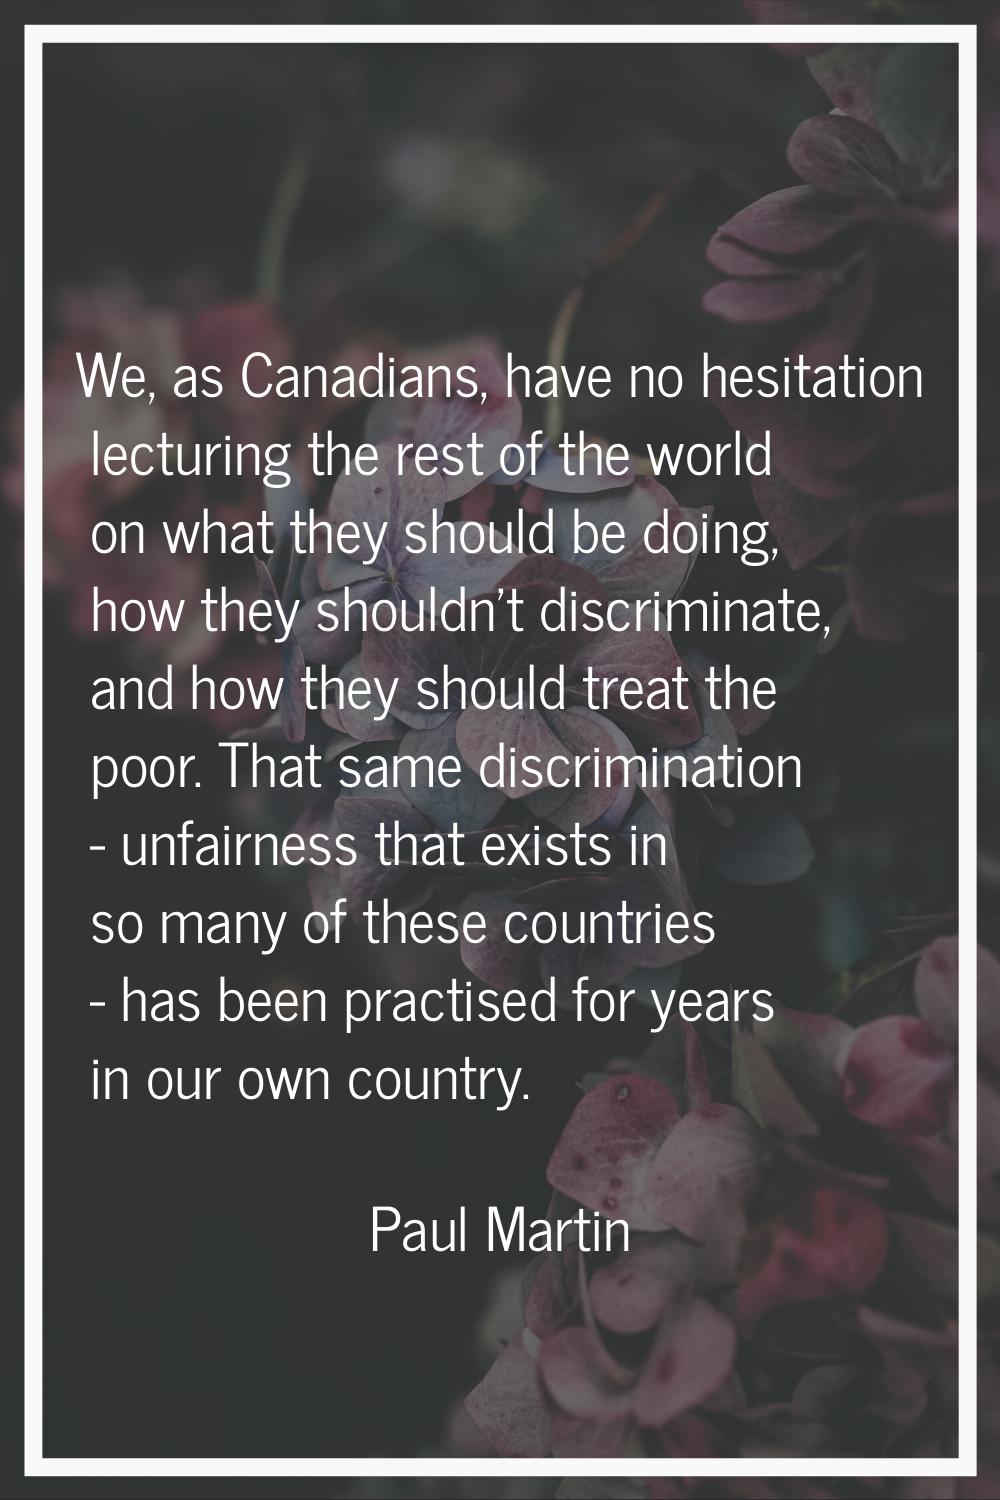 We, as Canadians, have no hesitation lecturing the rest of the world on what they should be doing, 